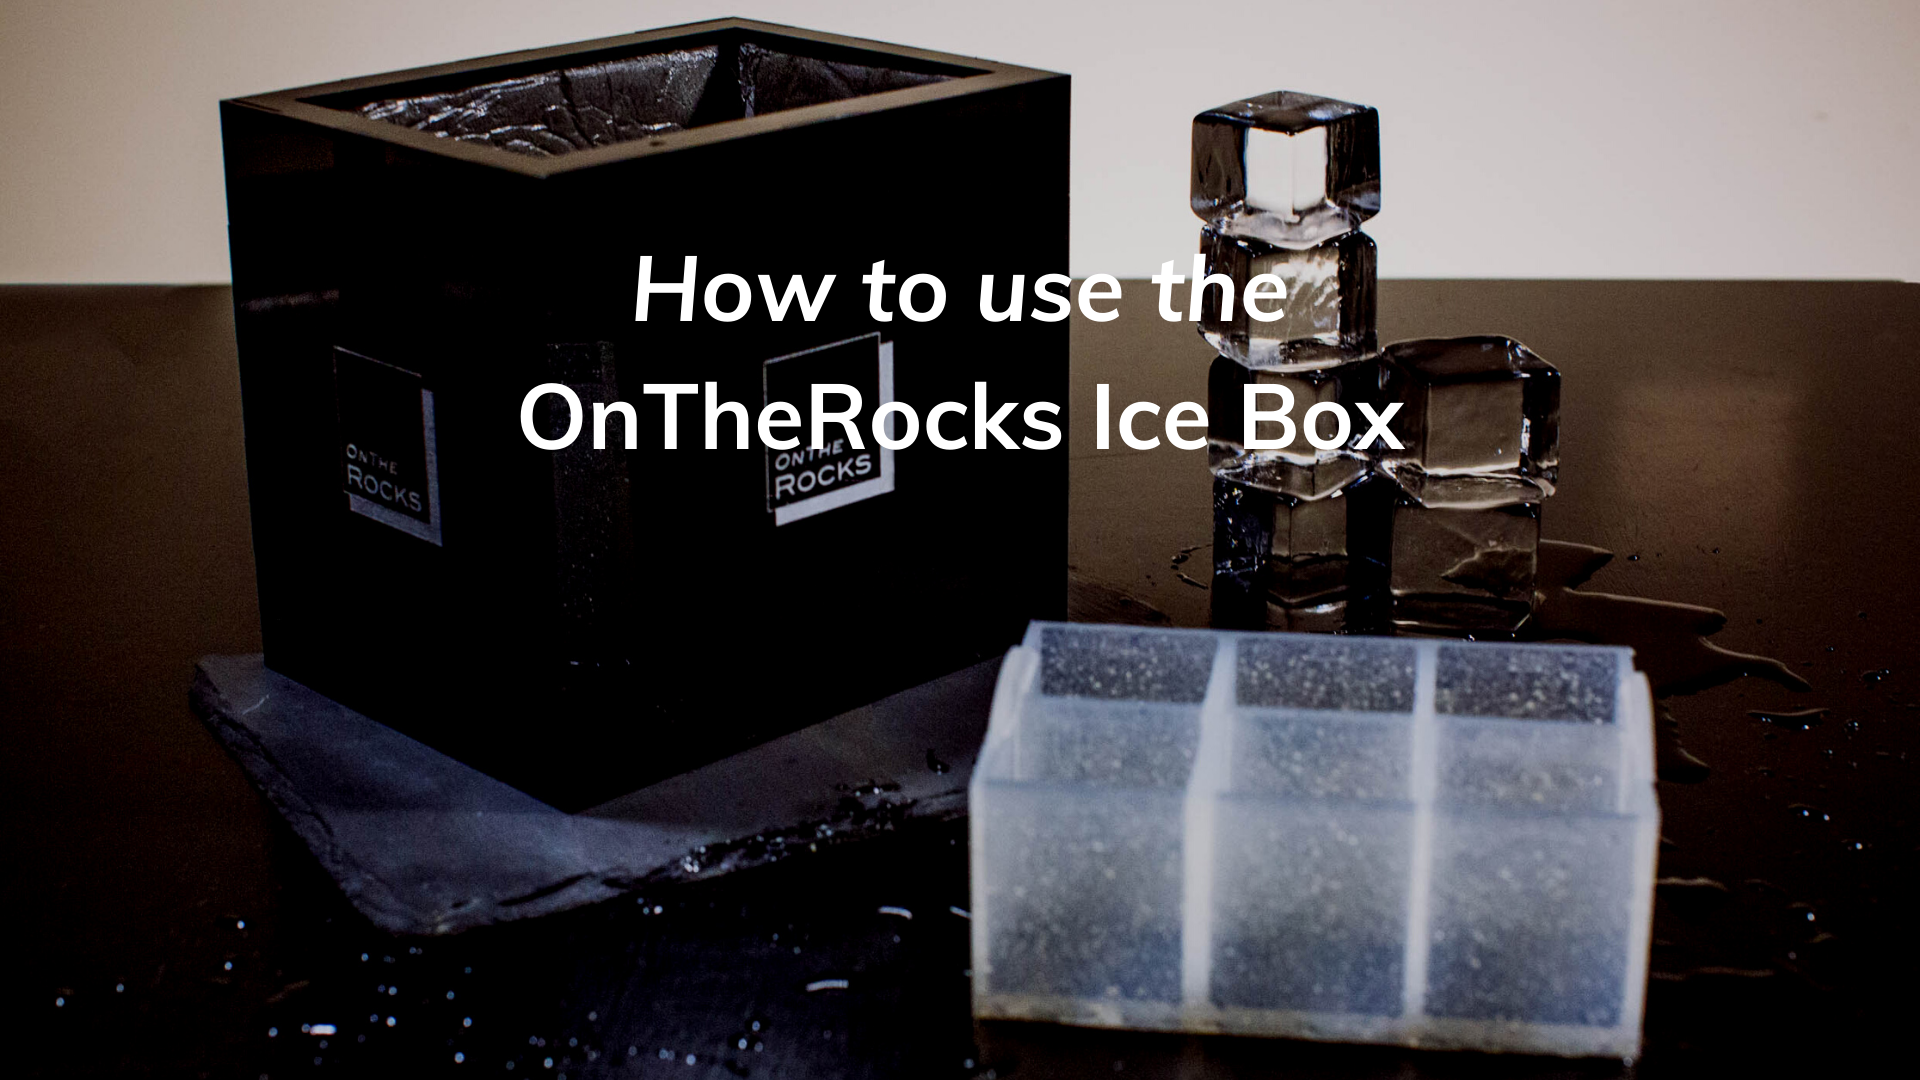 How to use the OnTheRocks Ice Box to make clear ice spheres or cubes for drinks at home. A video that walks through the process.